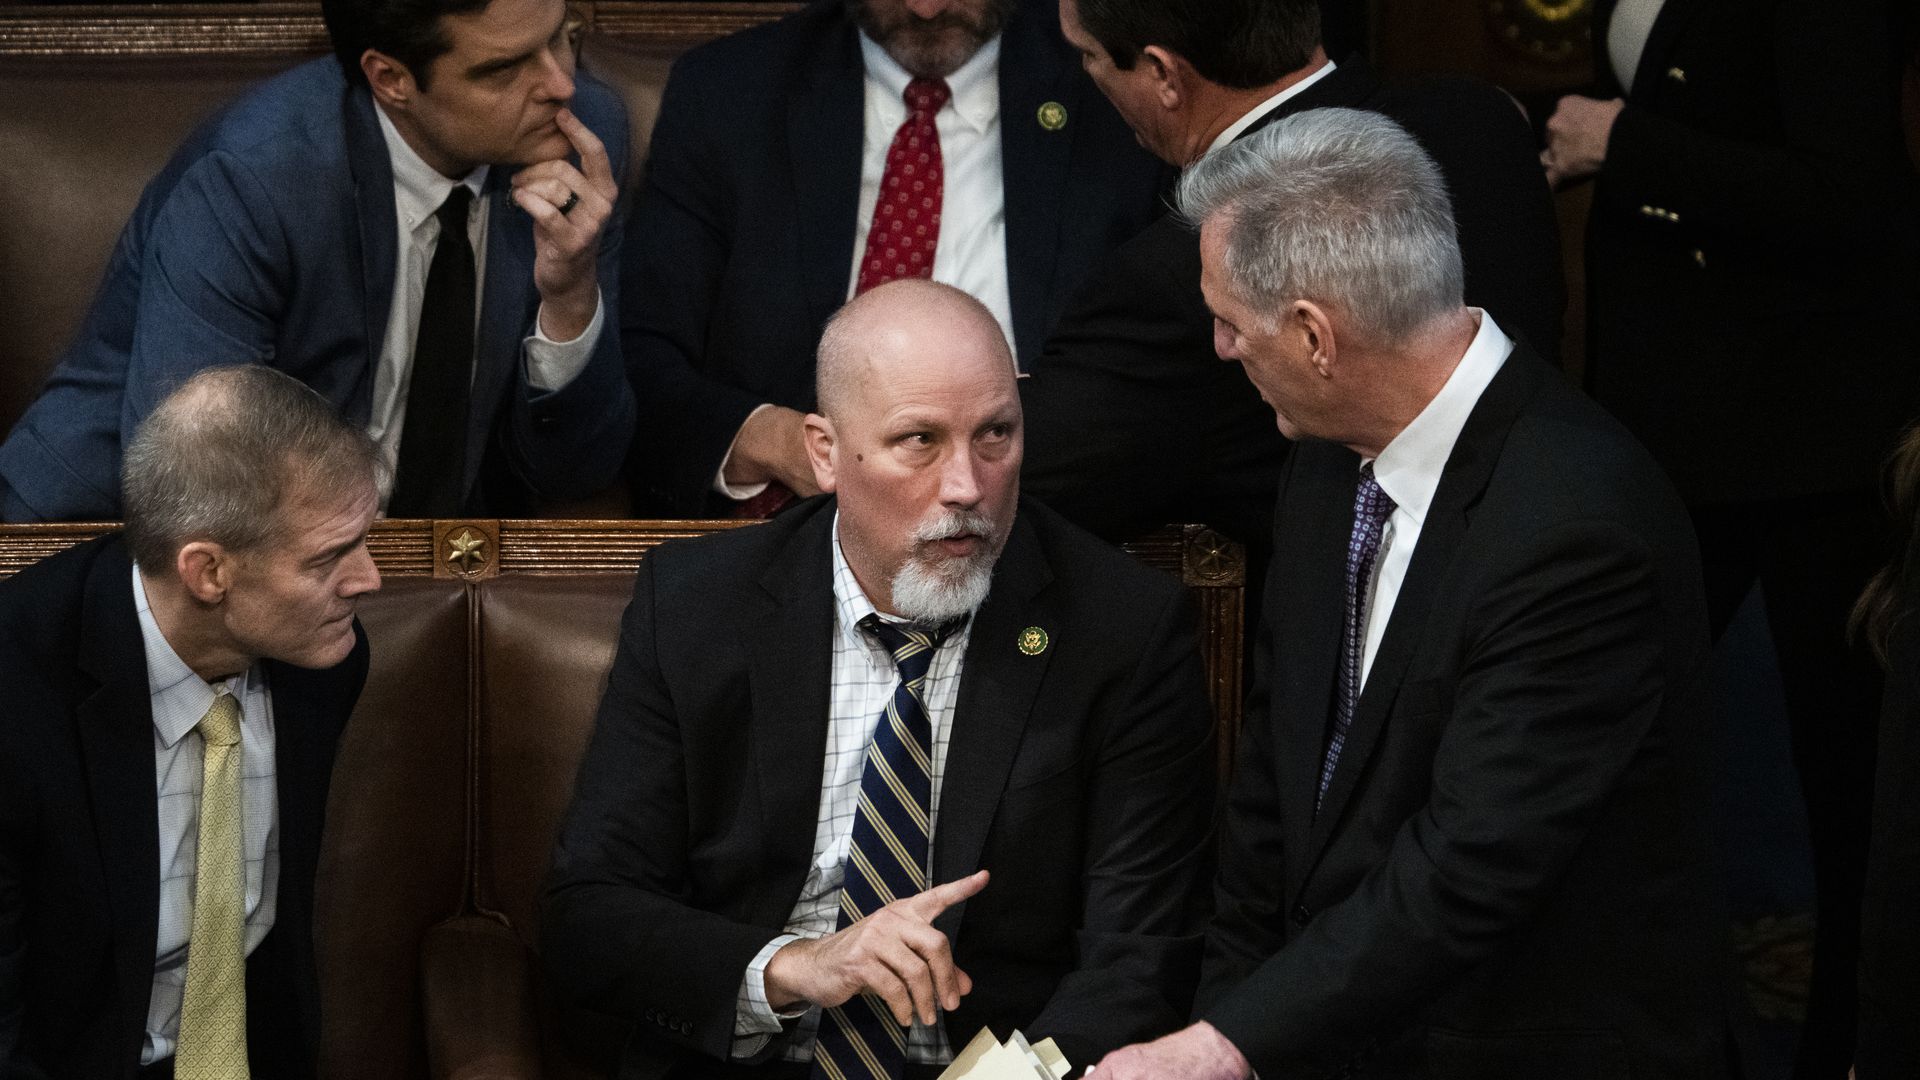 Chip Roy consults with Kevin McCarthy on the U.S. House floor.